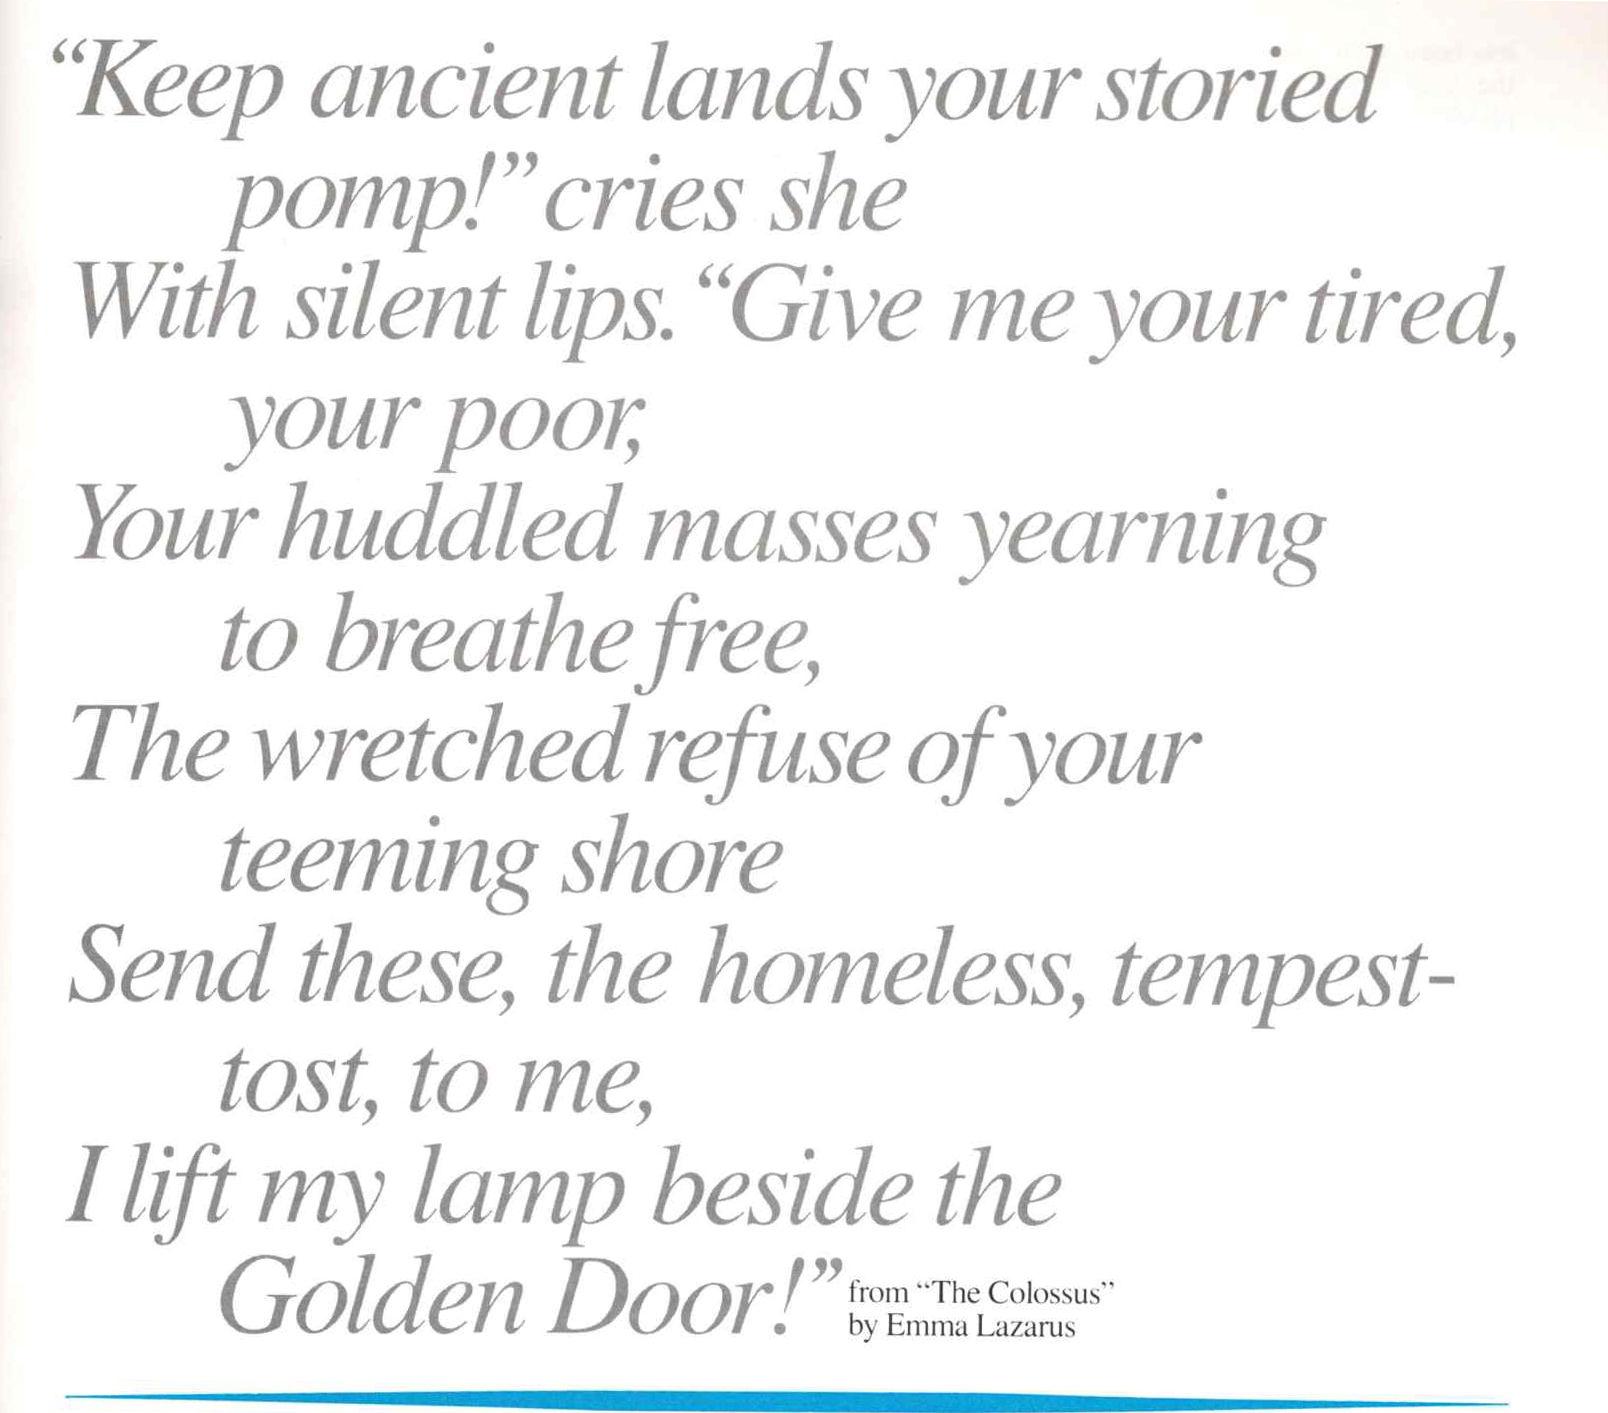 an excerpt from emma lazarus's poem the colossus 